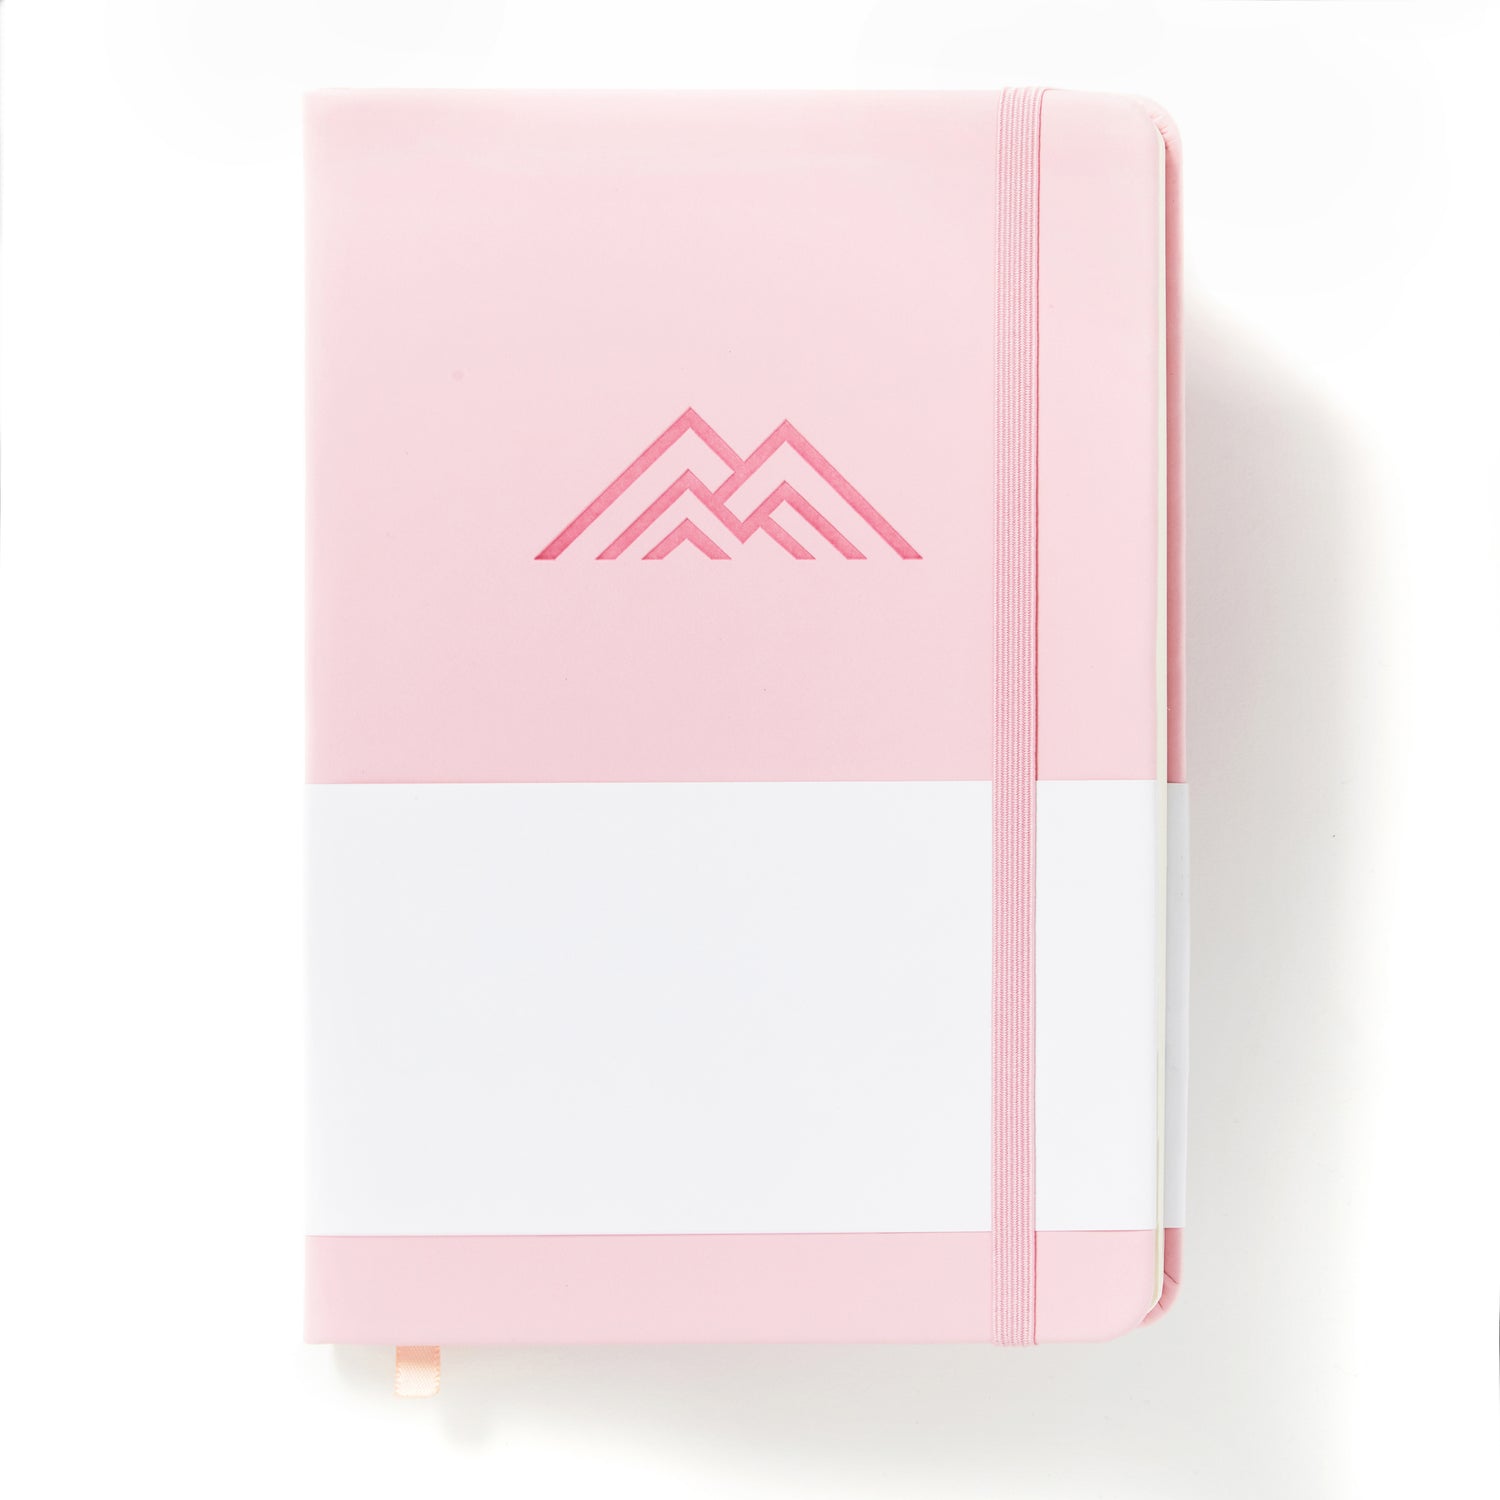 Password Book: Your Guardian in the Digital Realm